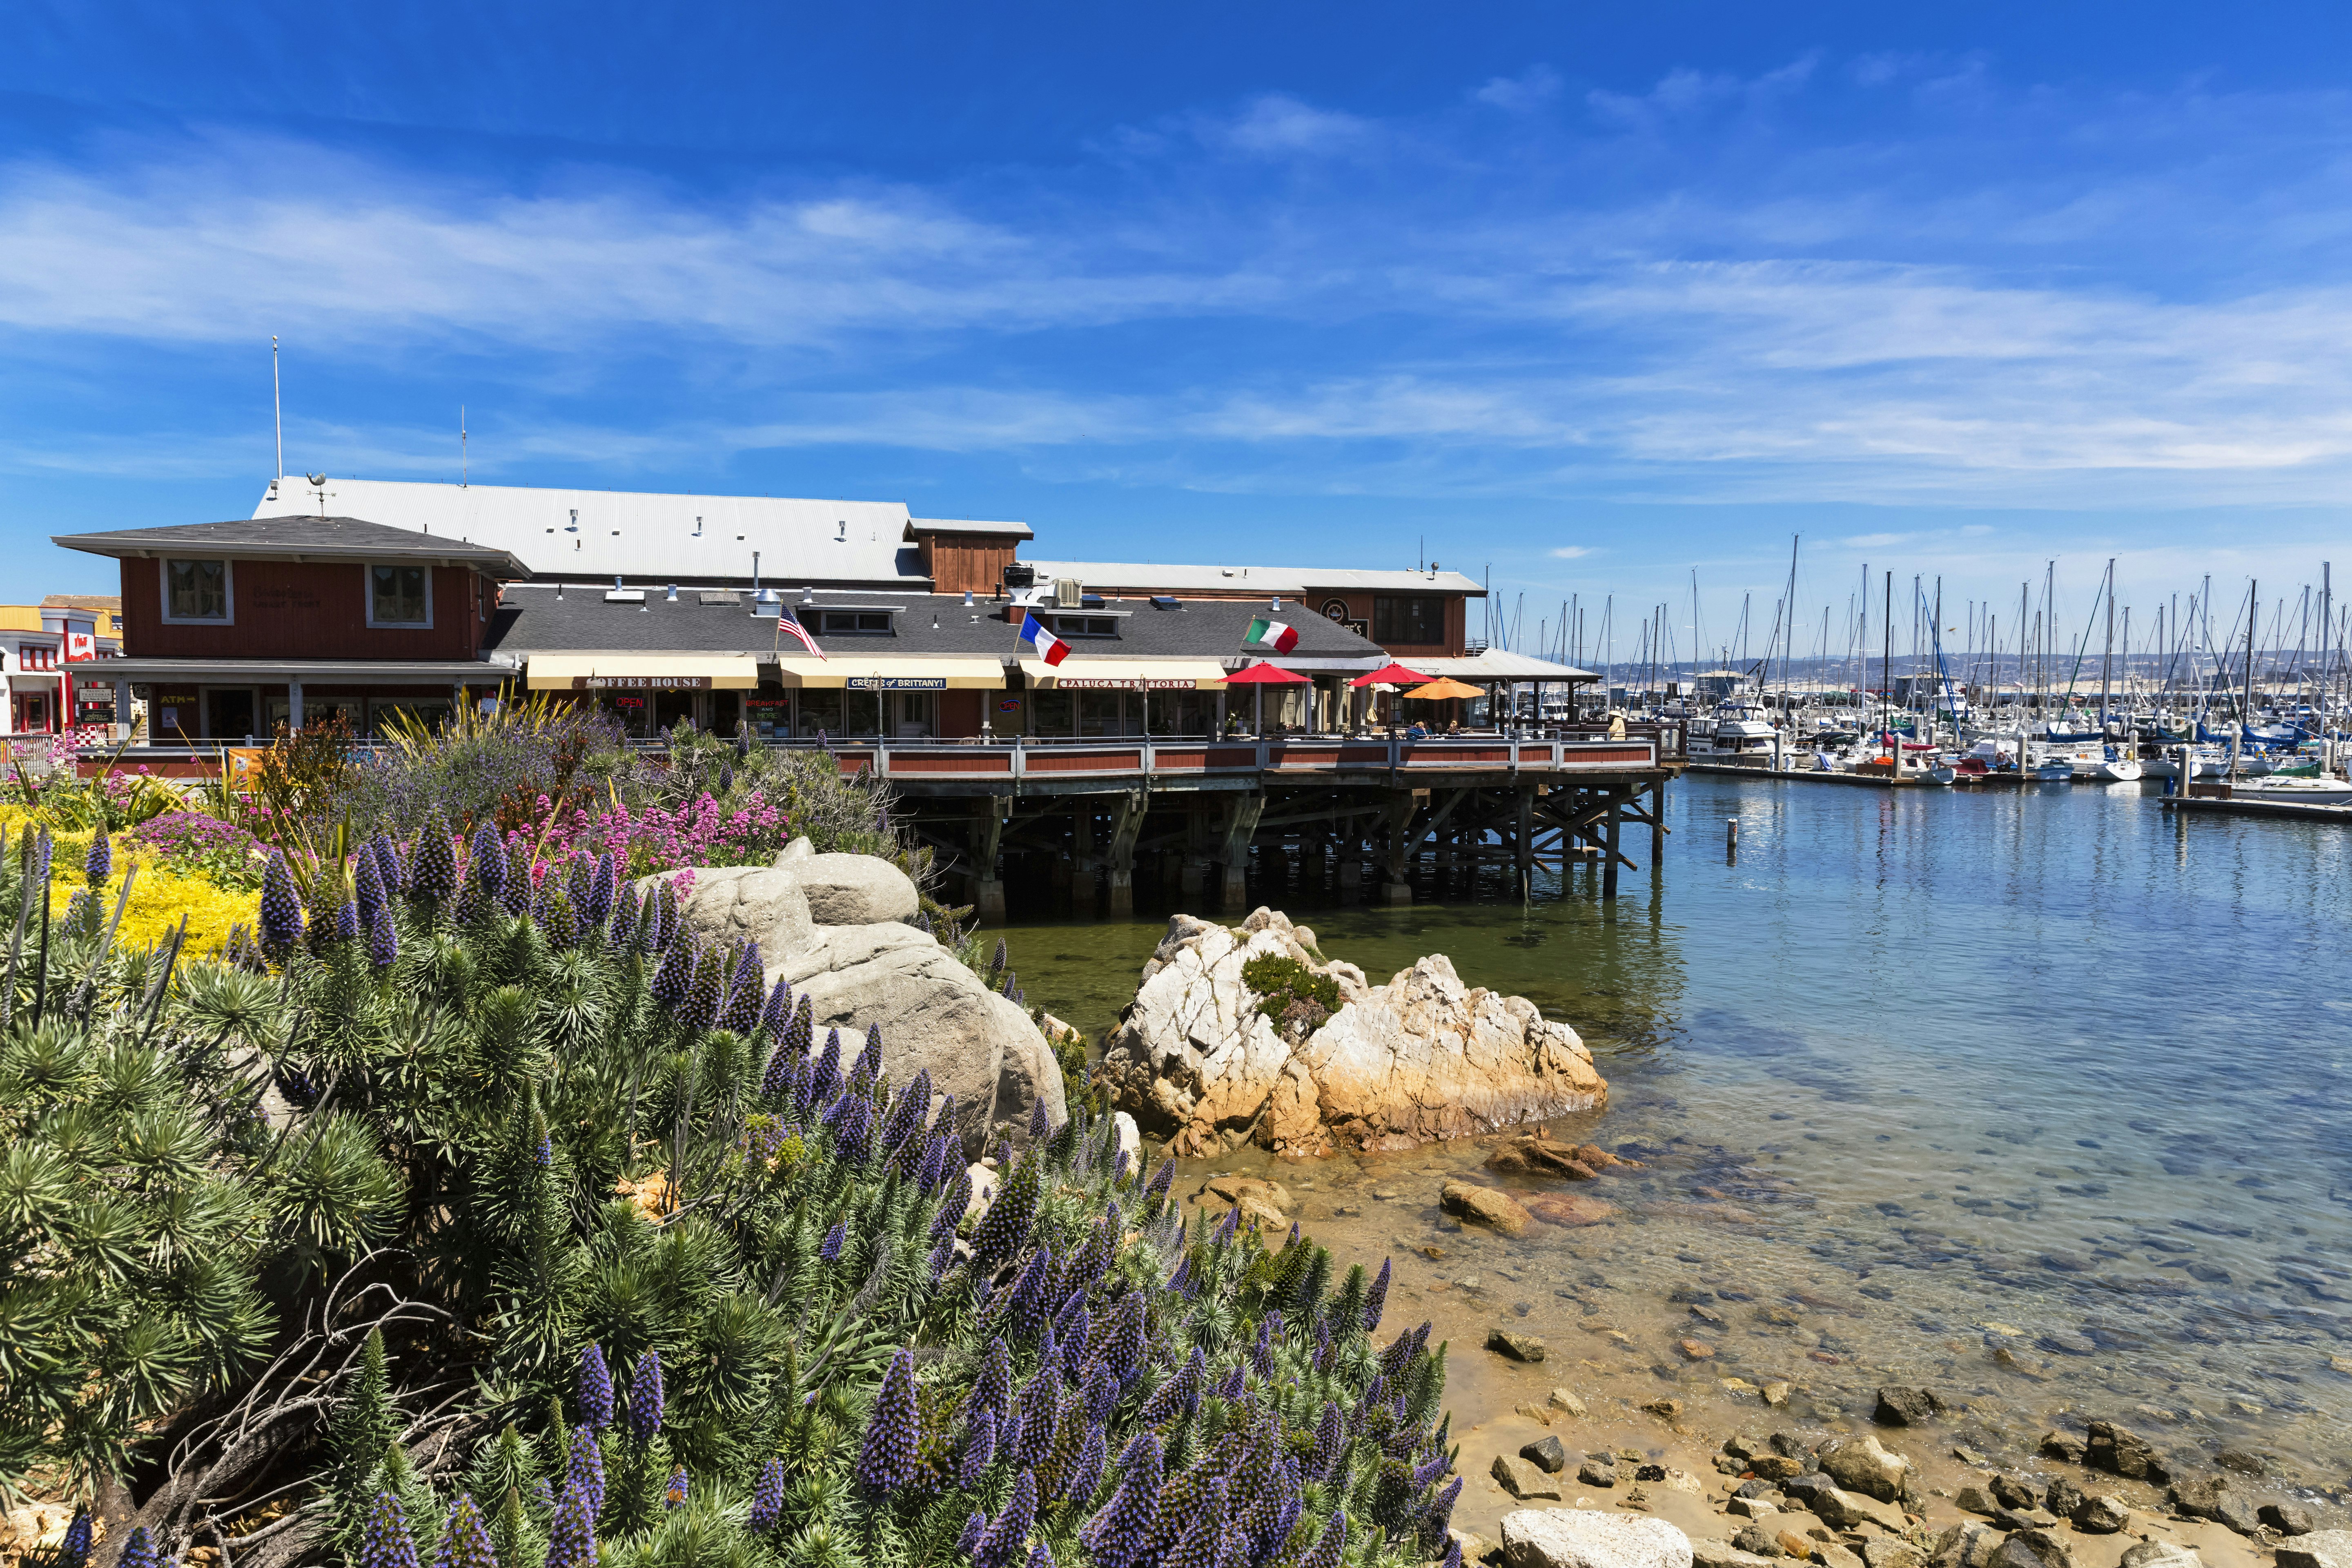 Cannery Wharf in Monterey is seen with a view of several sailboats tied up and the bay stretching out beyond; California ice cream